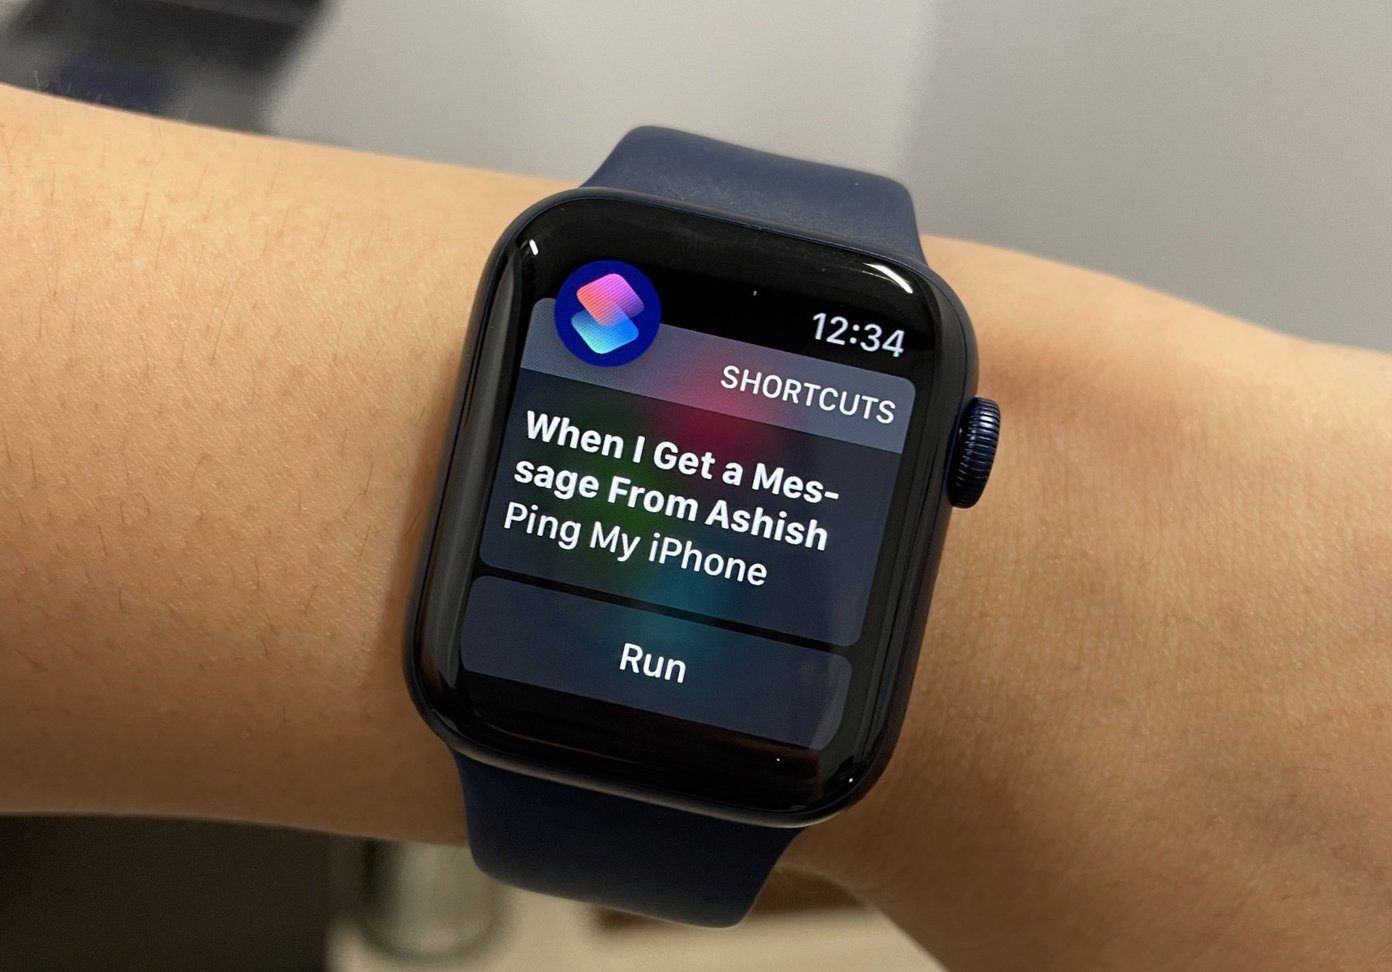 How to Add Shortcuts to Apple Watch 1